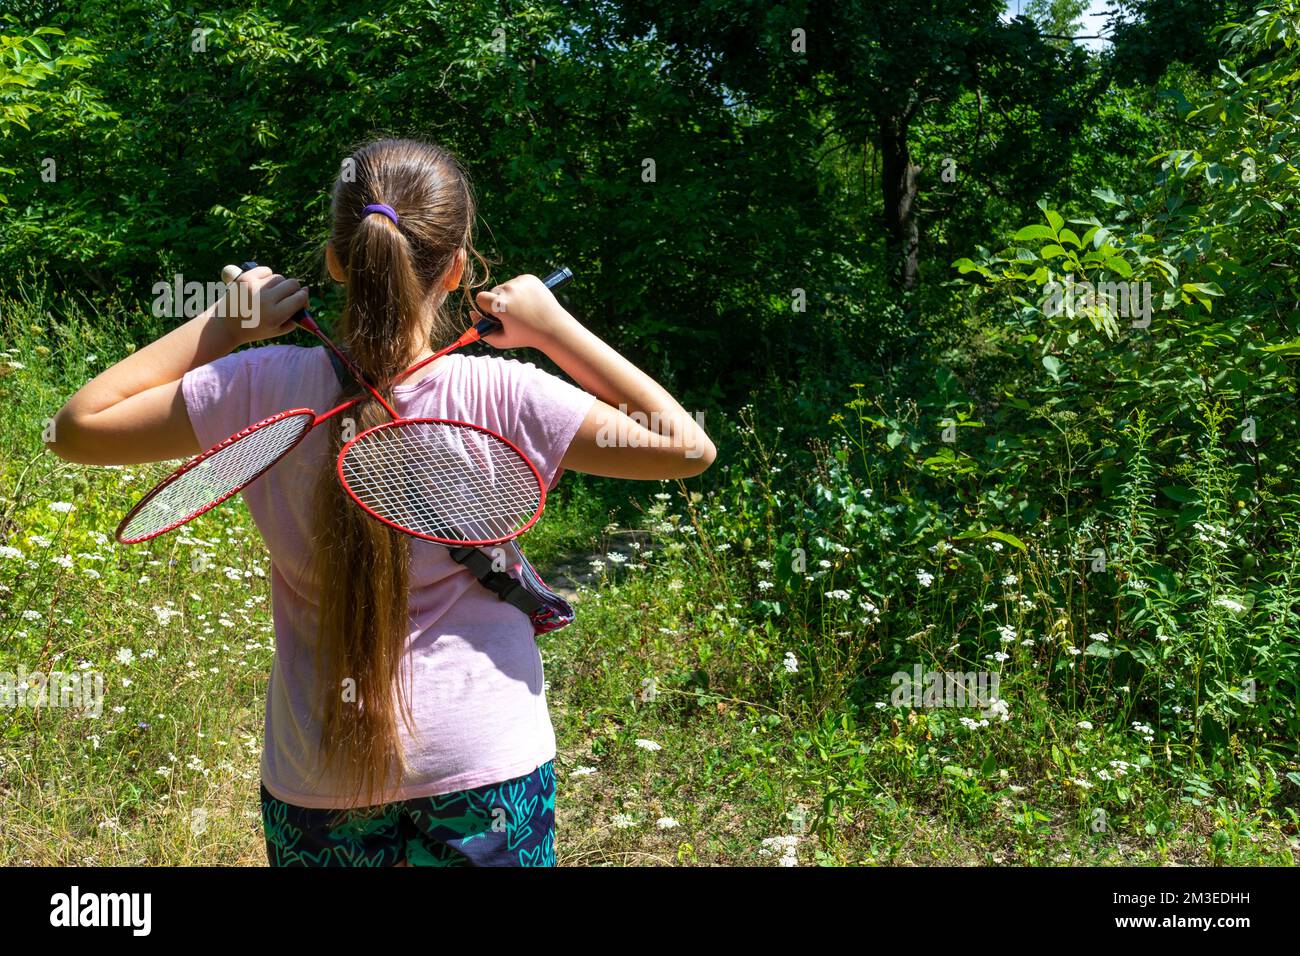 A girl stands in a forest clearing with two tennis rackets crossed on her back Stock Photo